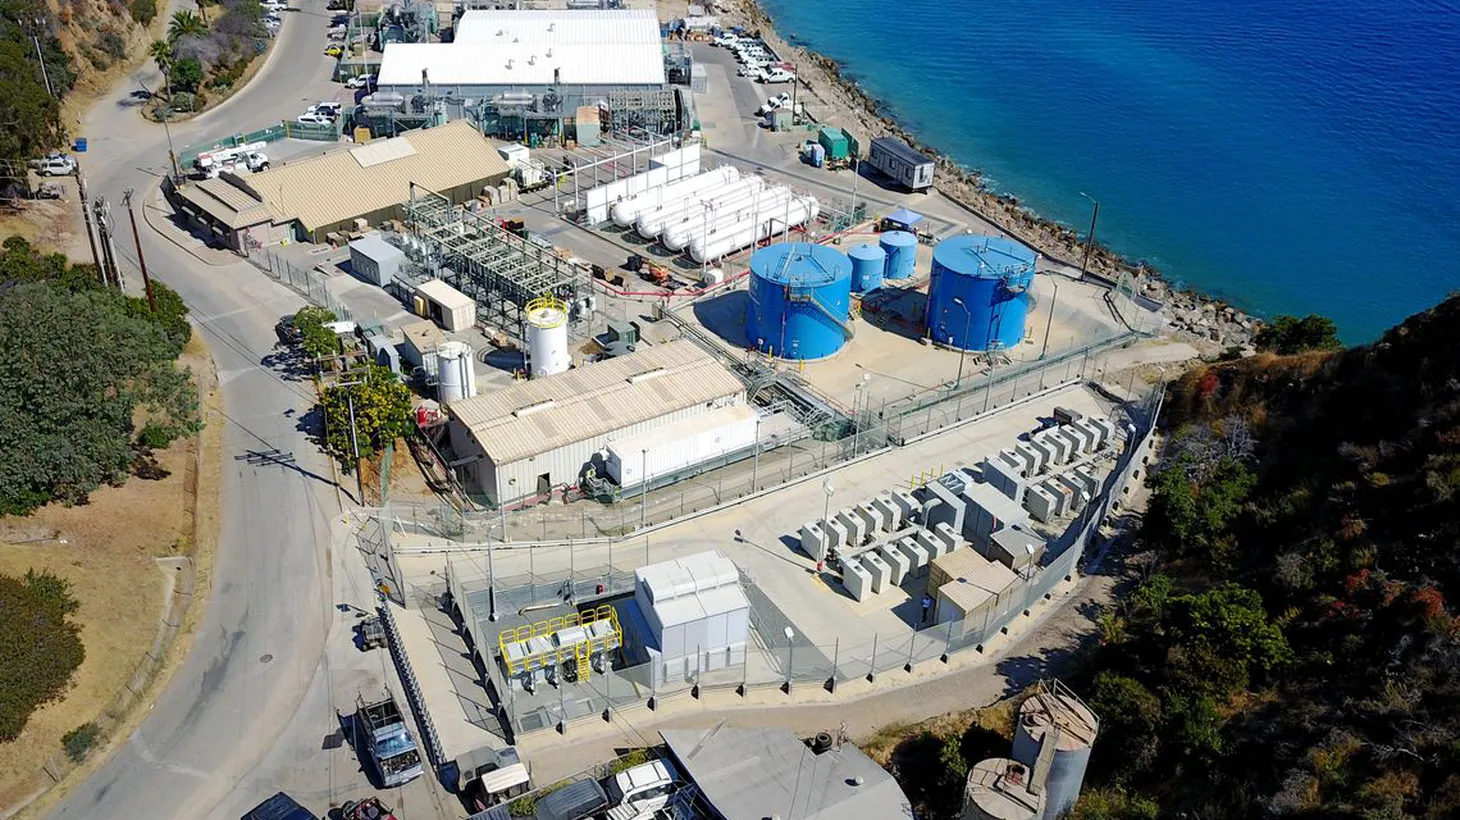 The desalination plants on Catalina Island produce 40% of the island’s drinking water.